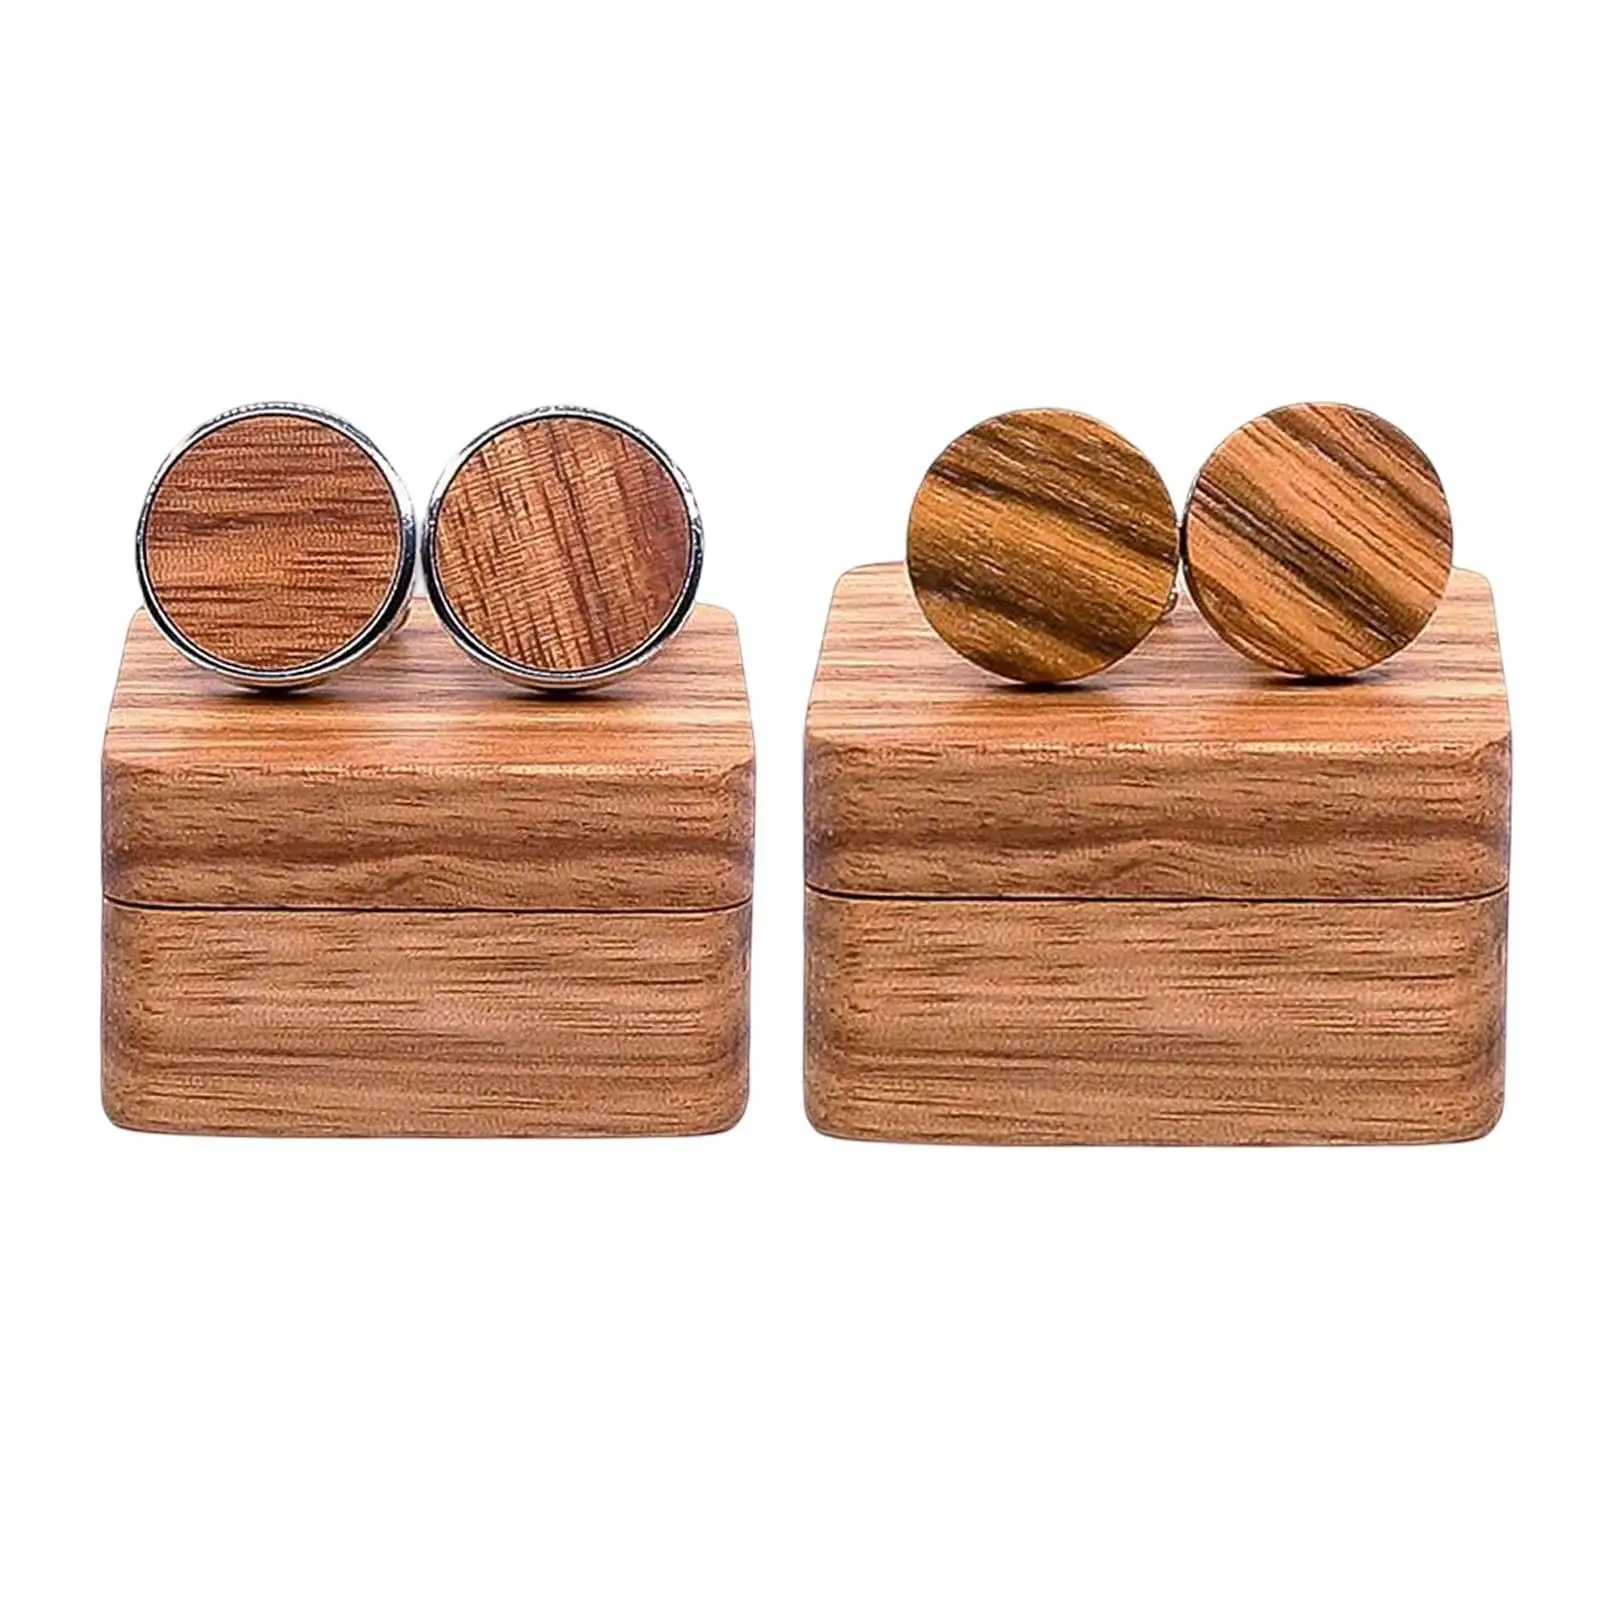 Rustic Cufflinks +Wood Gift Box Handsome Cuff Links for Bussiness Husband Anniversary Birthday Gifts